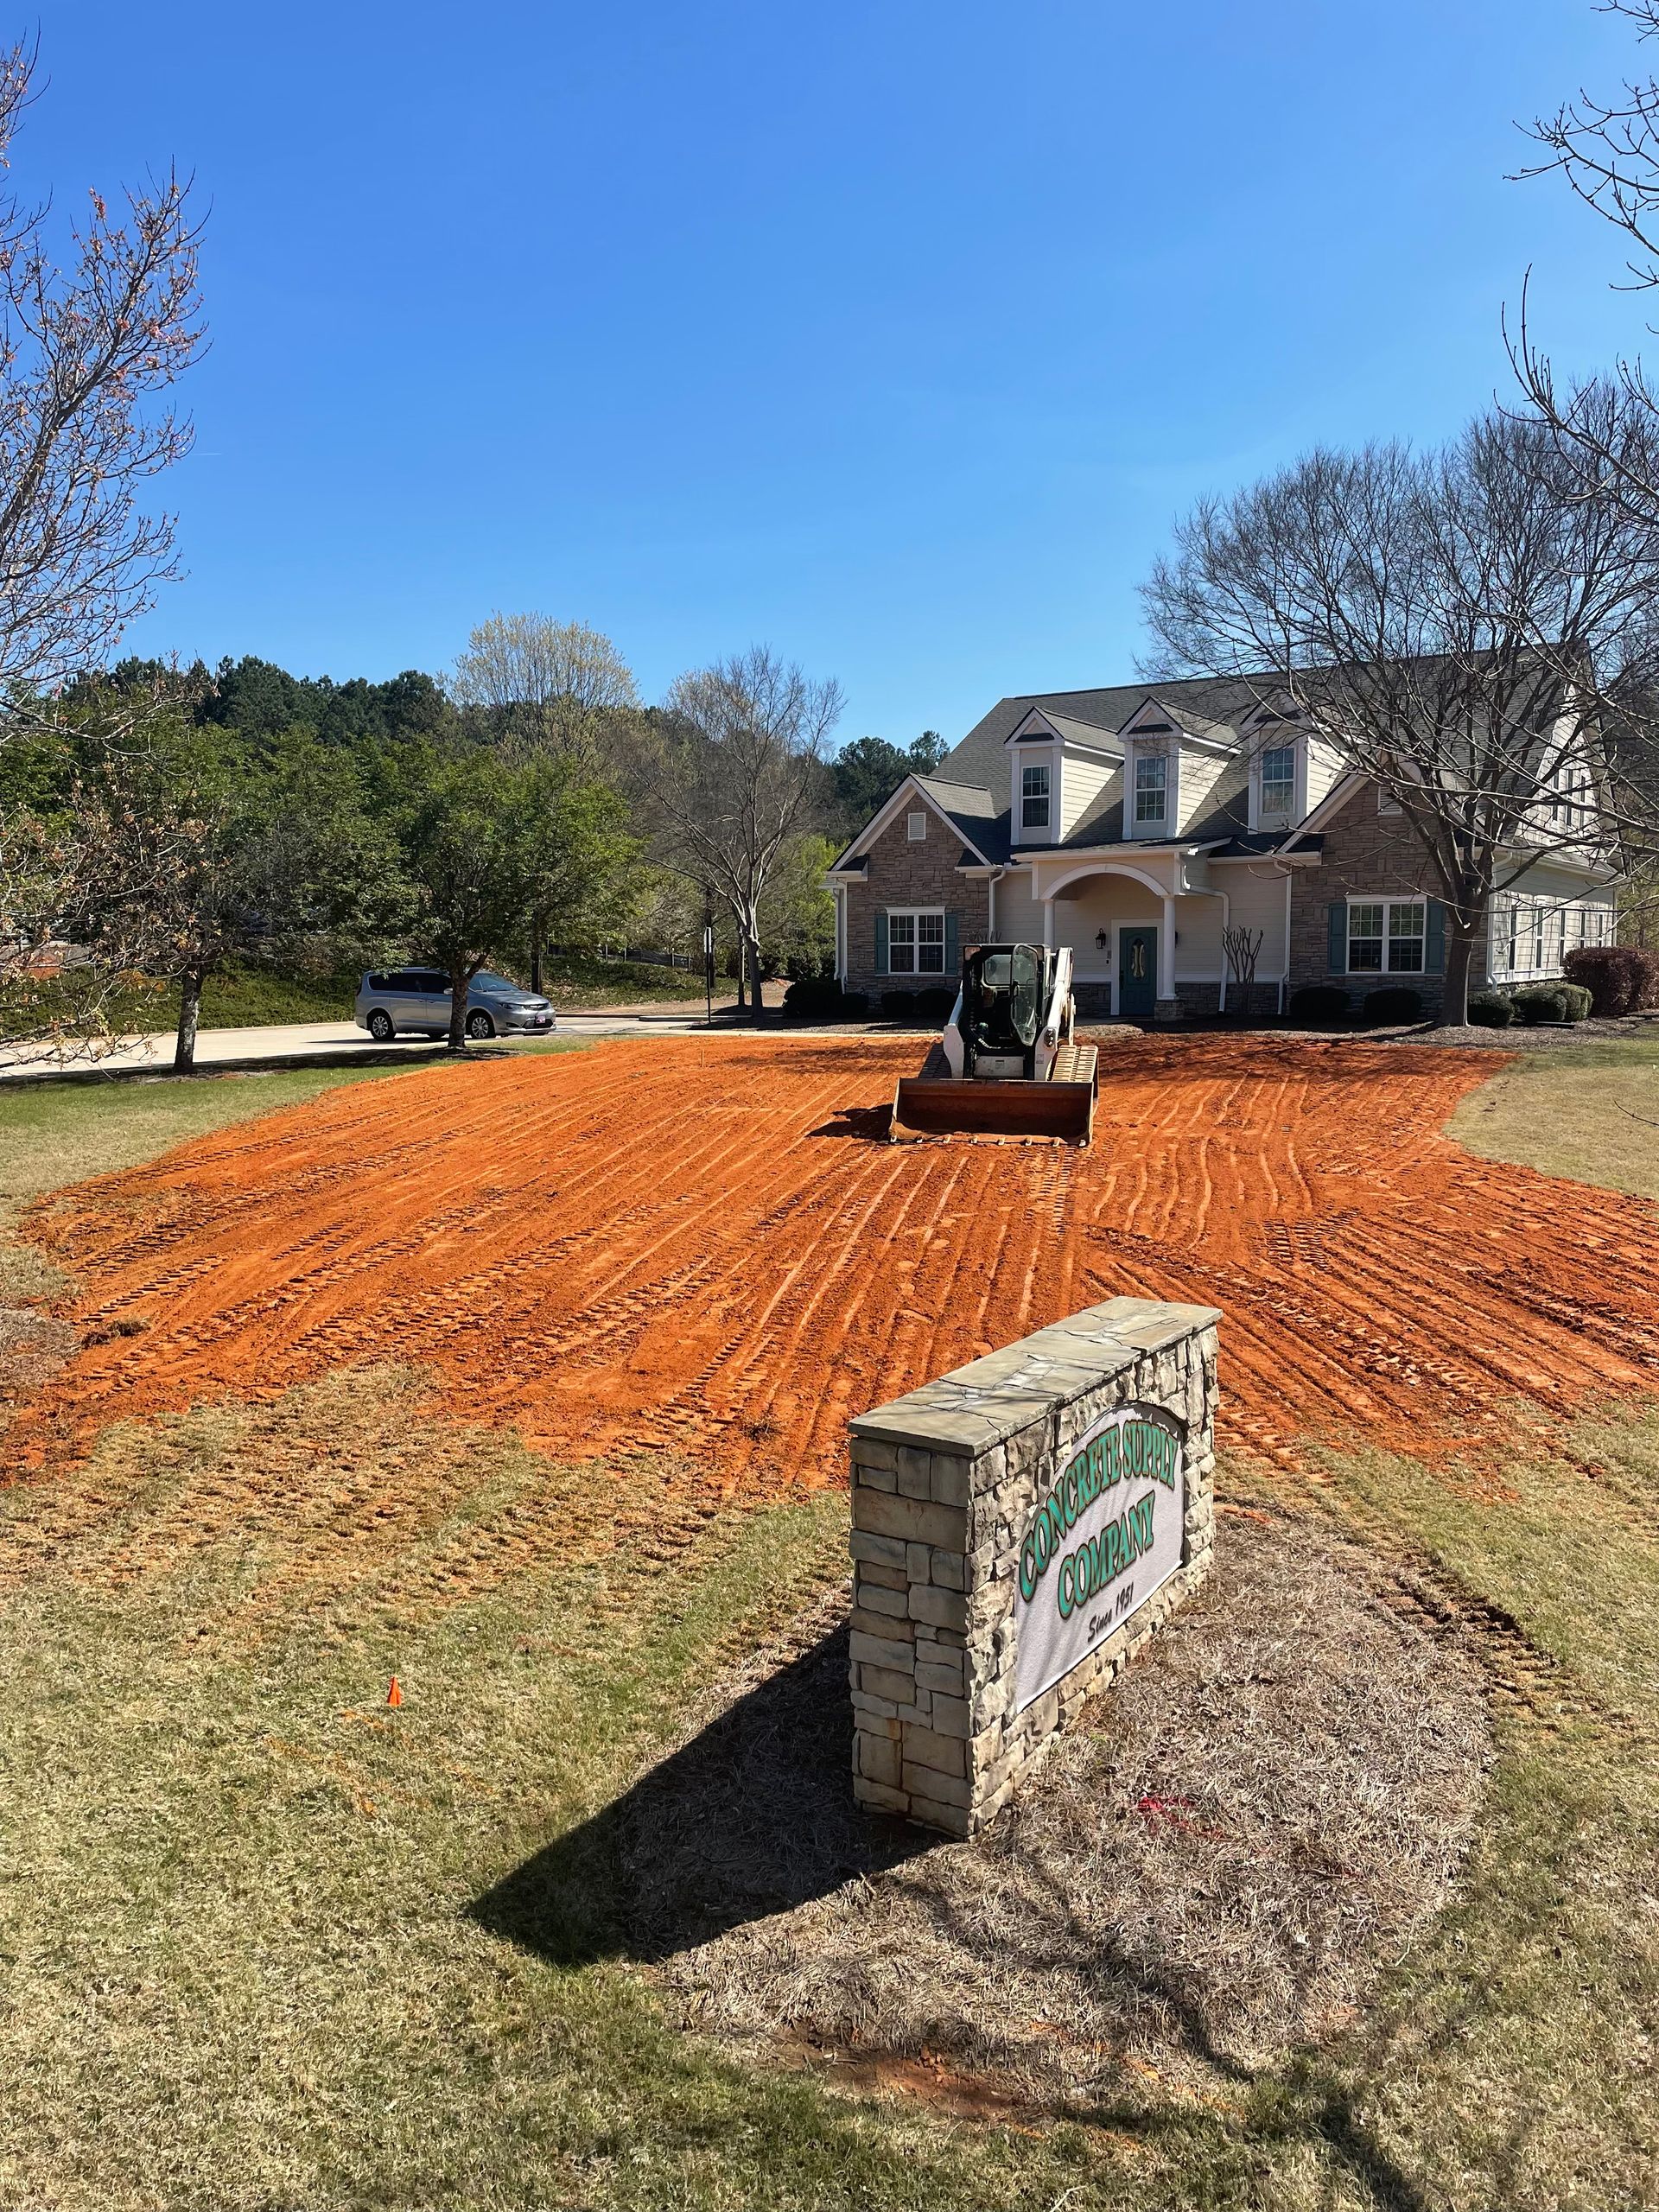 Septic Tank Repair and Installation - After Image